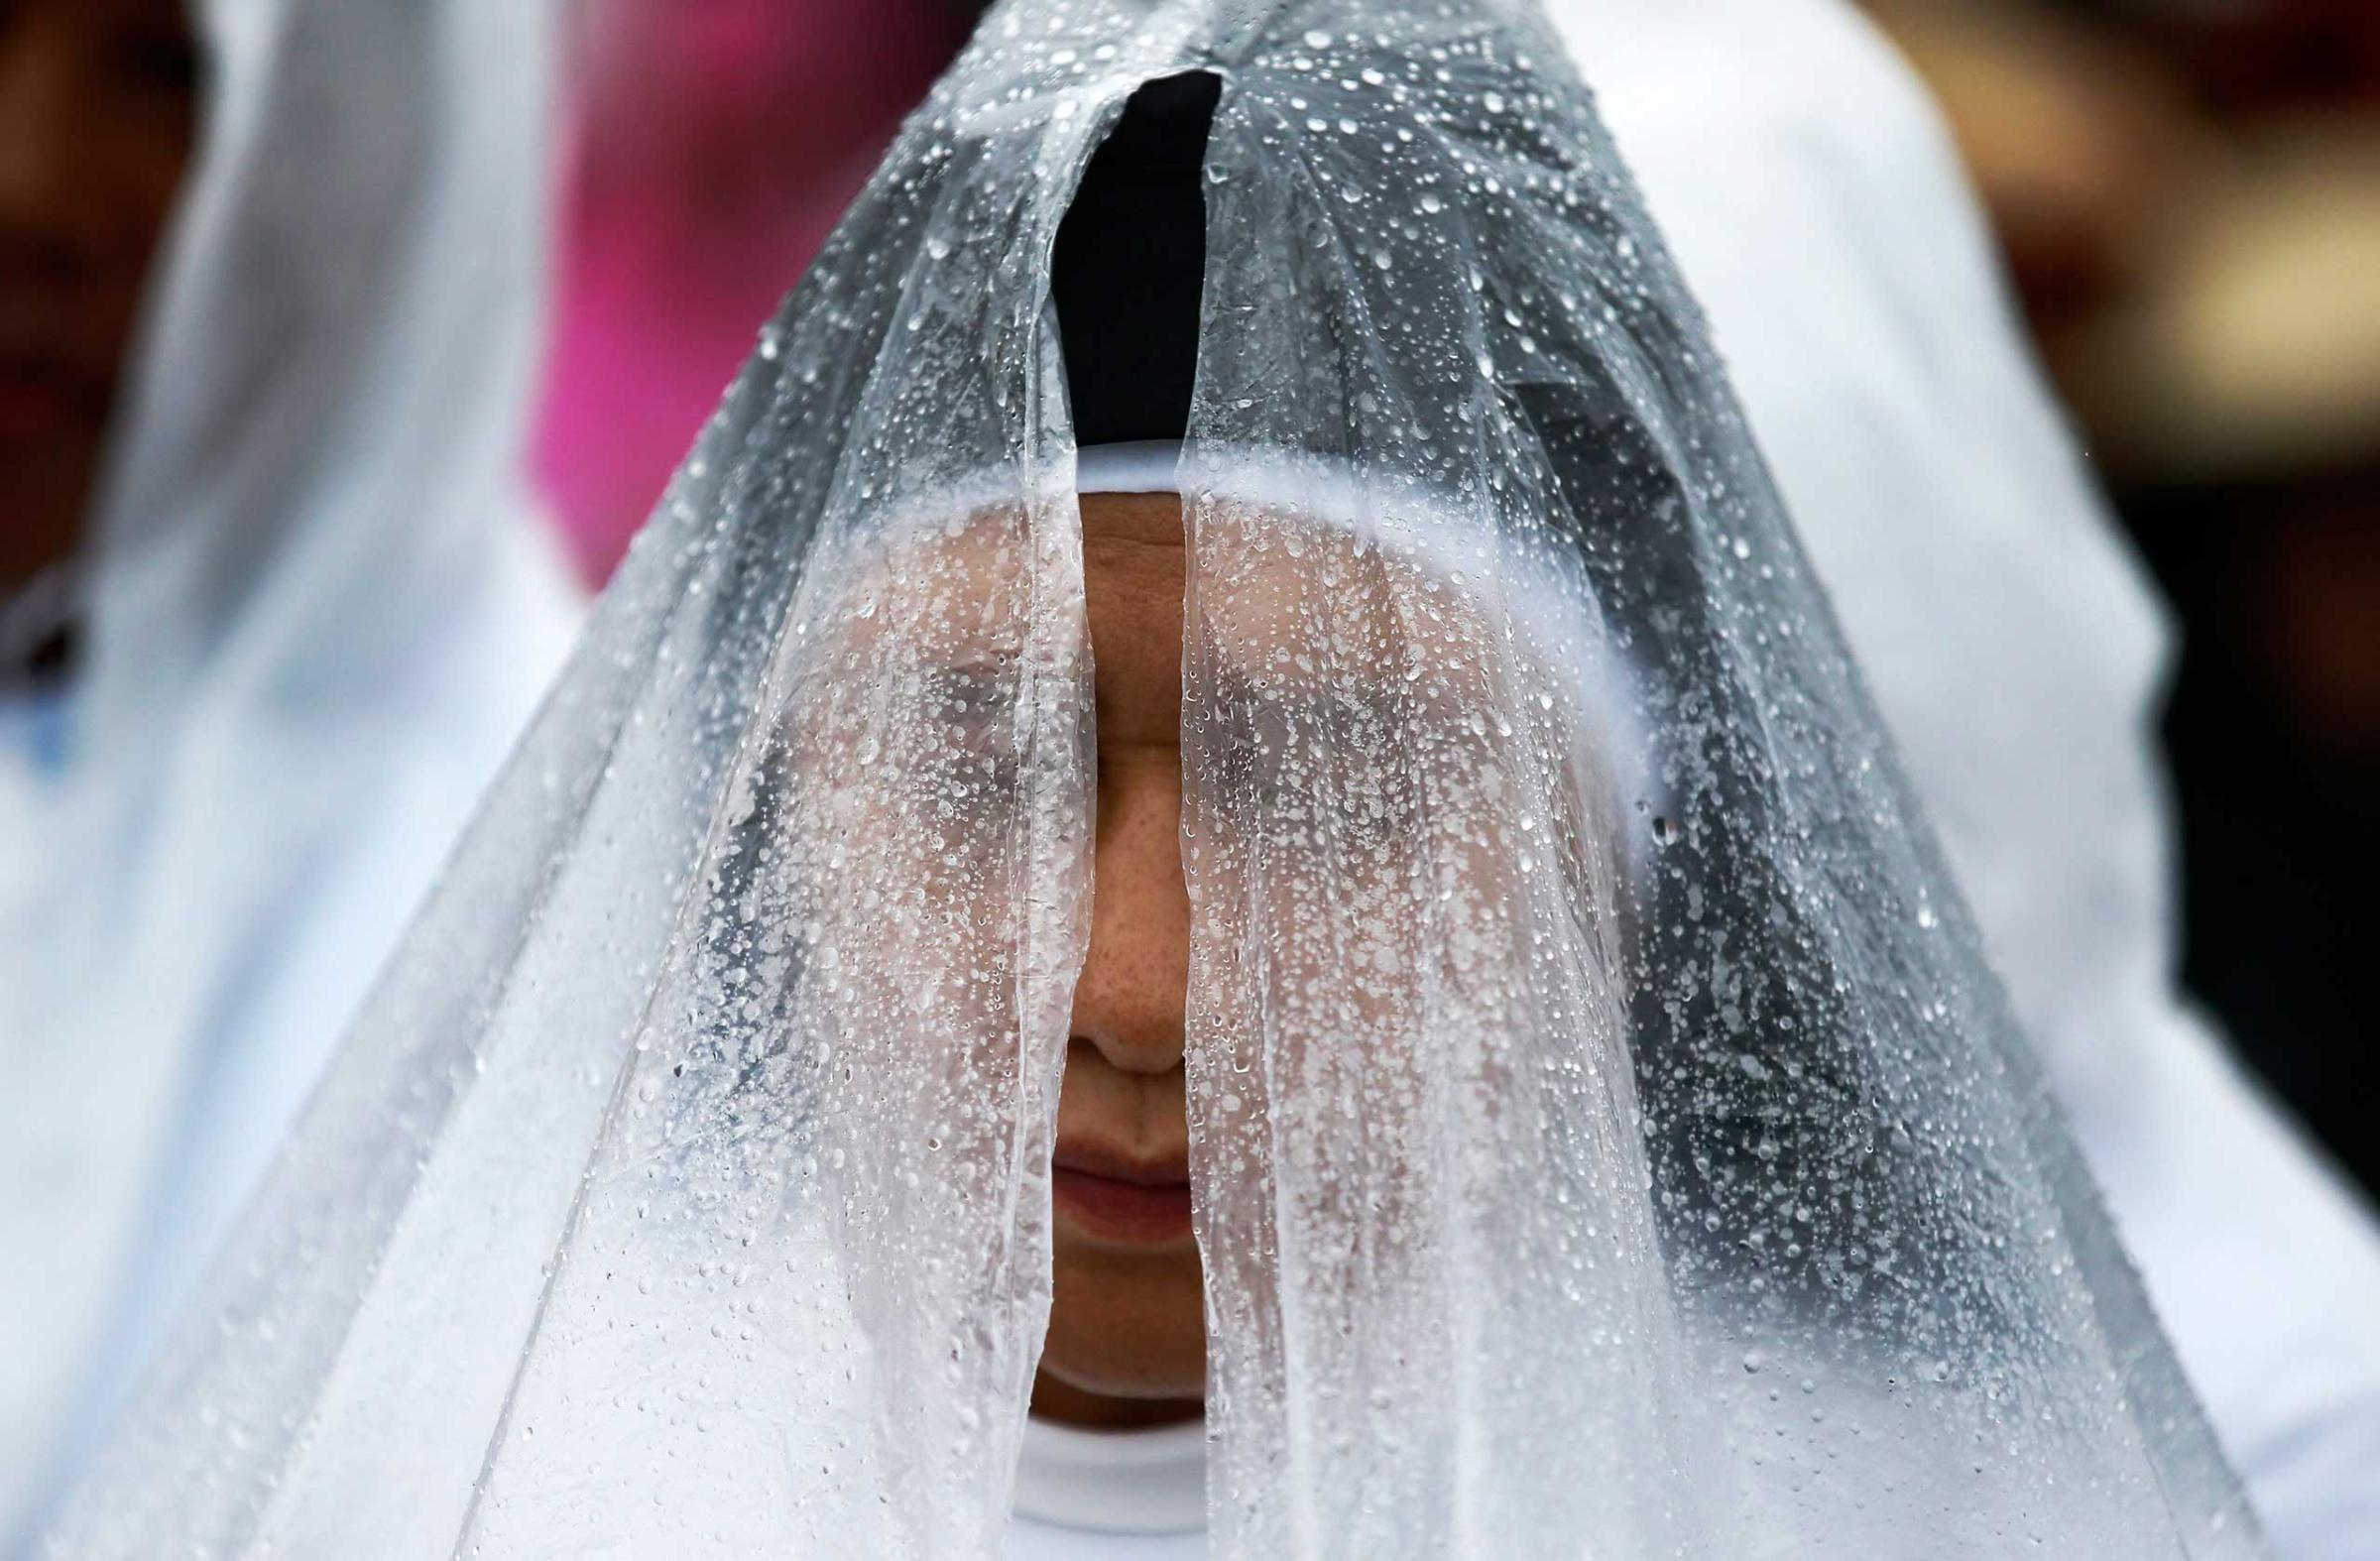 A Filipino nun prays during a downpour prior to Pope Francis mass in Manila, Jan. 18, 2015.